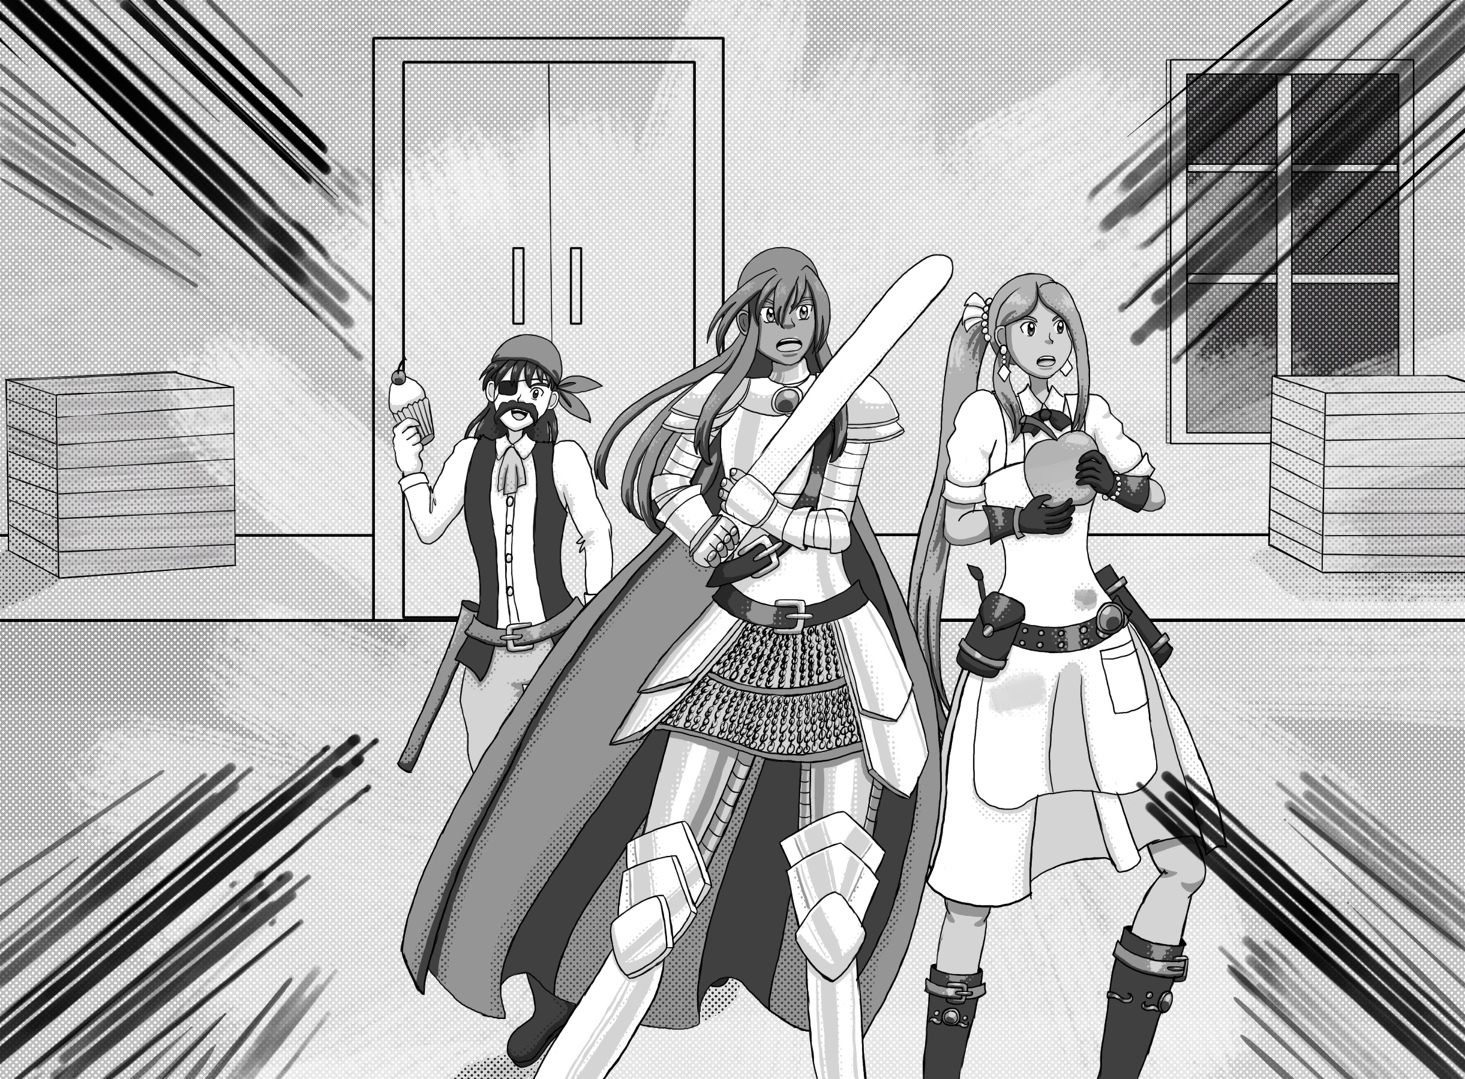 Image description: A grayscale half-tone drawing showing 3 characters. Alfbern is dressed as a pirate and holding a cupcake as a weapon. Monica in the middle is dressed as a knight and wielding a baguette. Claudia is dressed like an artisan and is holding a cannonball-sized apple. In the background is a mess hall with crates fo food